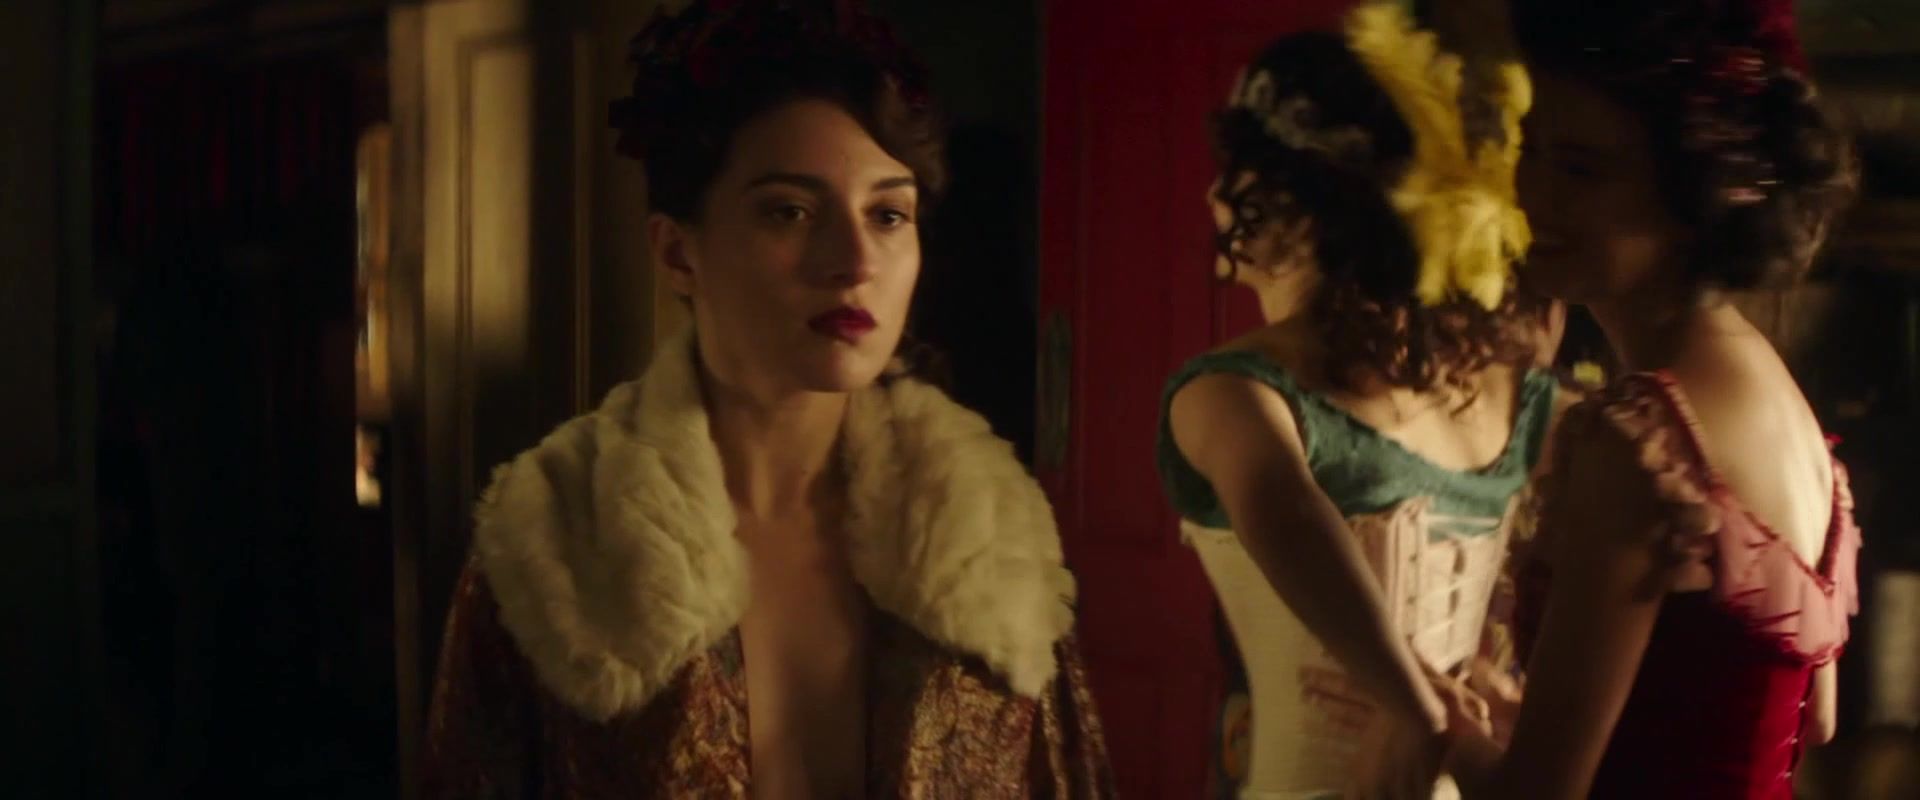 Beauty Maria Valverde nude - The Limehouse Golem (2017) Pick Up